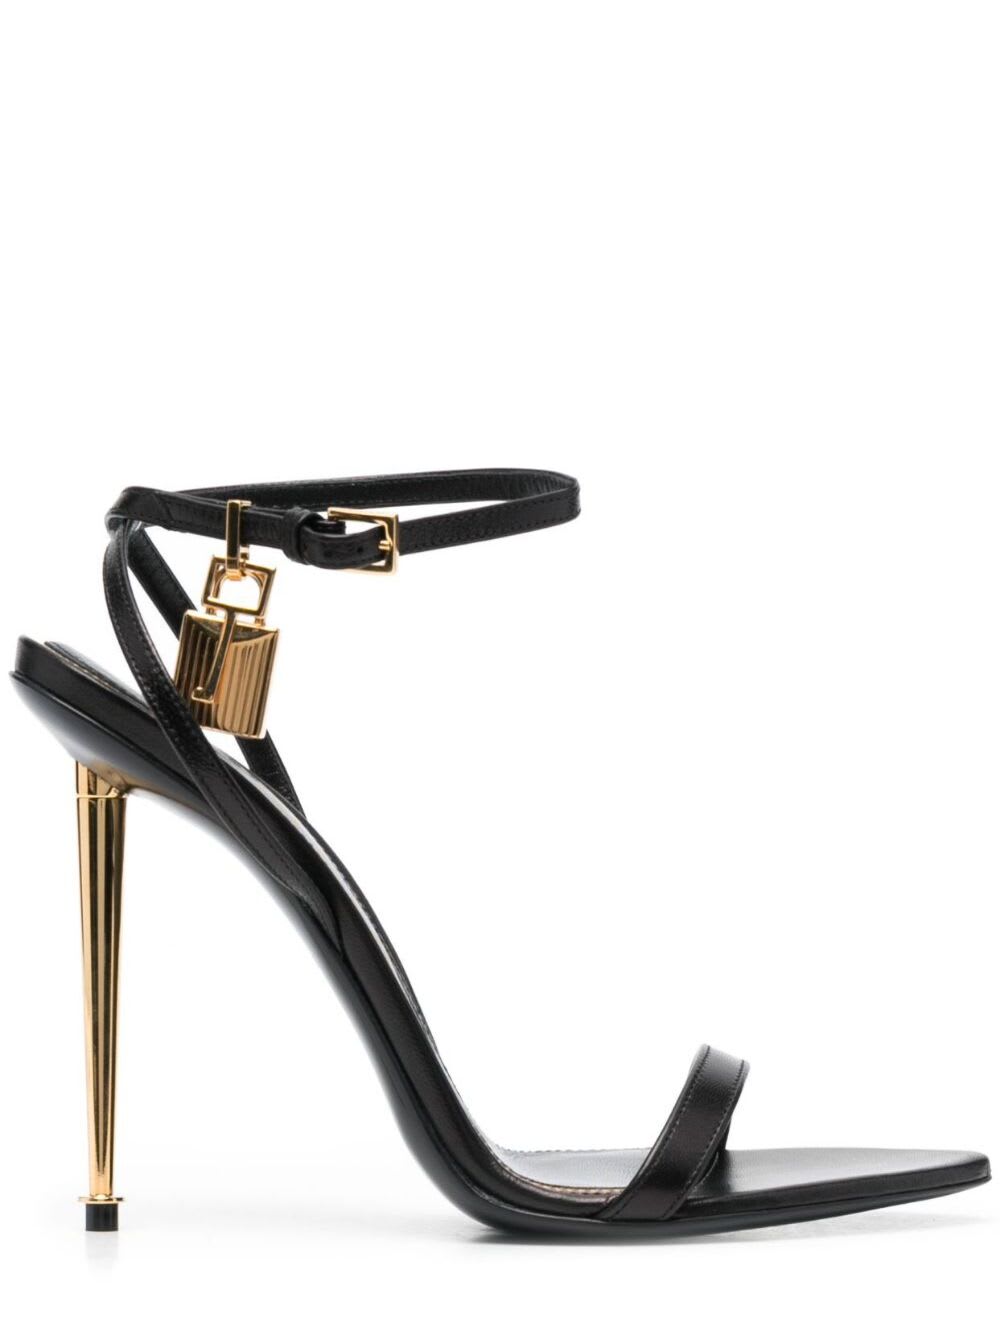 TOM FORD BLACK SANDALS WITH METAL HEEL AND PADLOCK IN LEATHER WOMAN